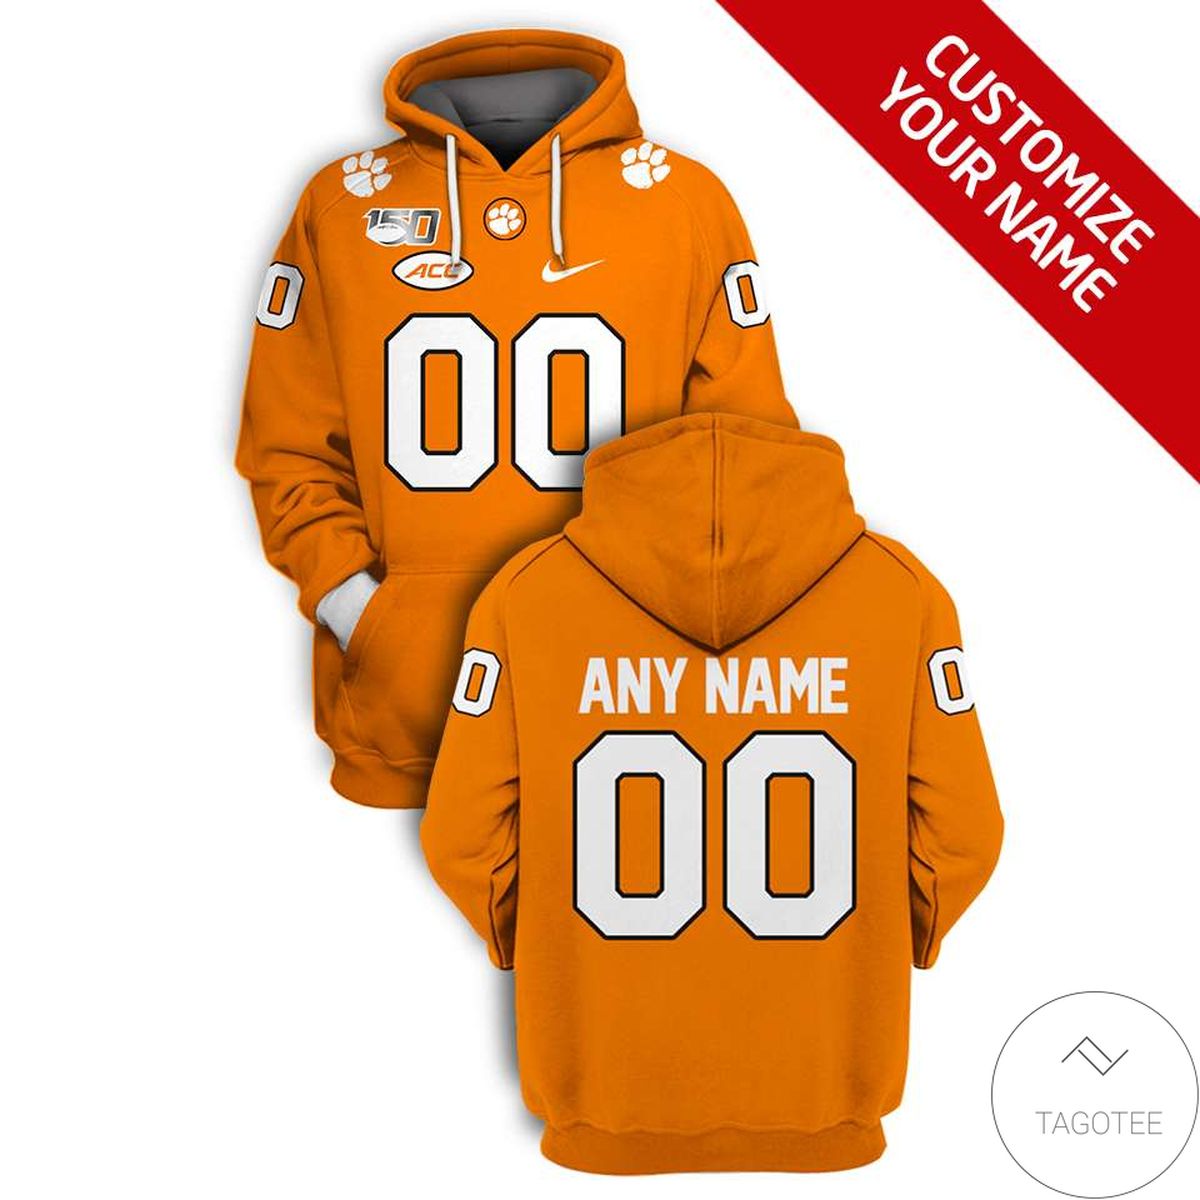 Personalized Clemson Tigers Branded Unisex 3d Hoodie